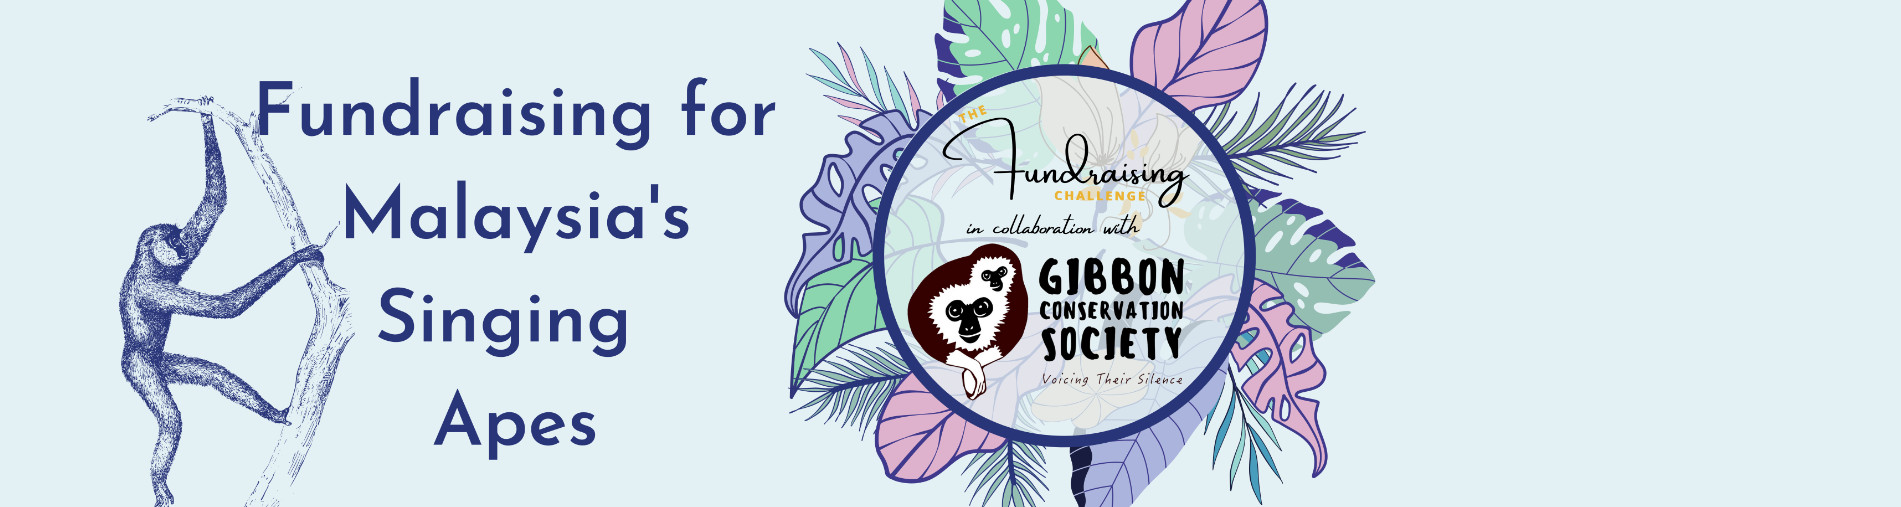 Supporting gibbons - Malaysia's singing ape